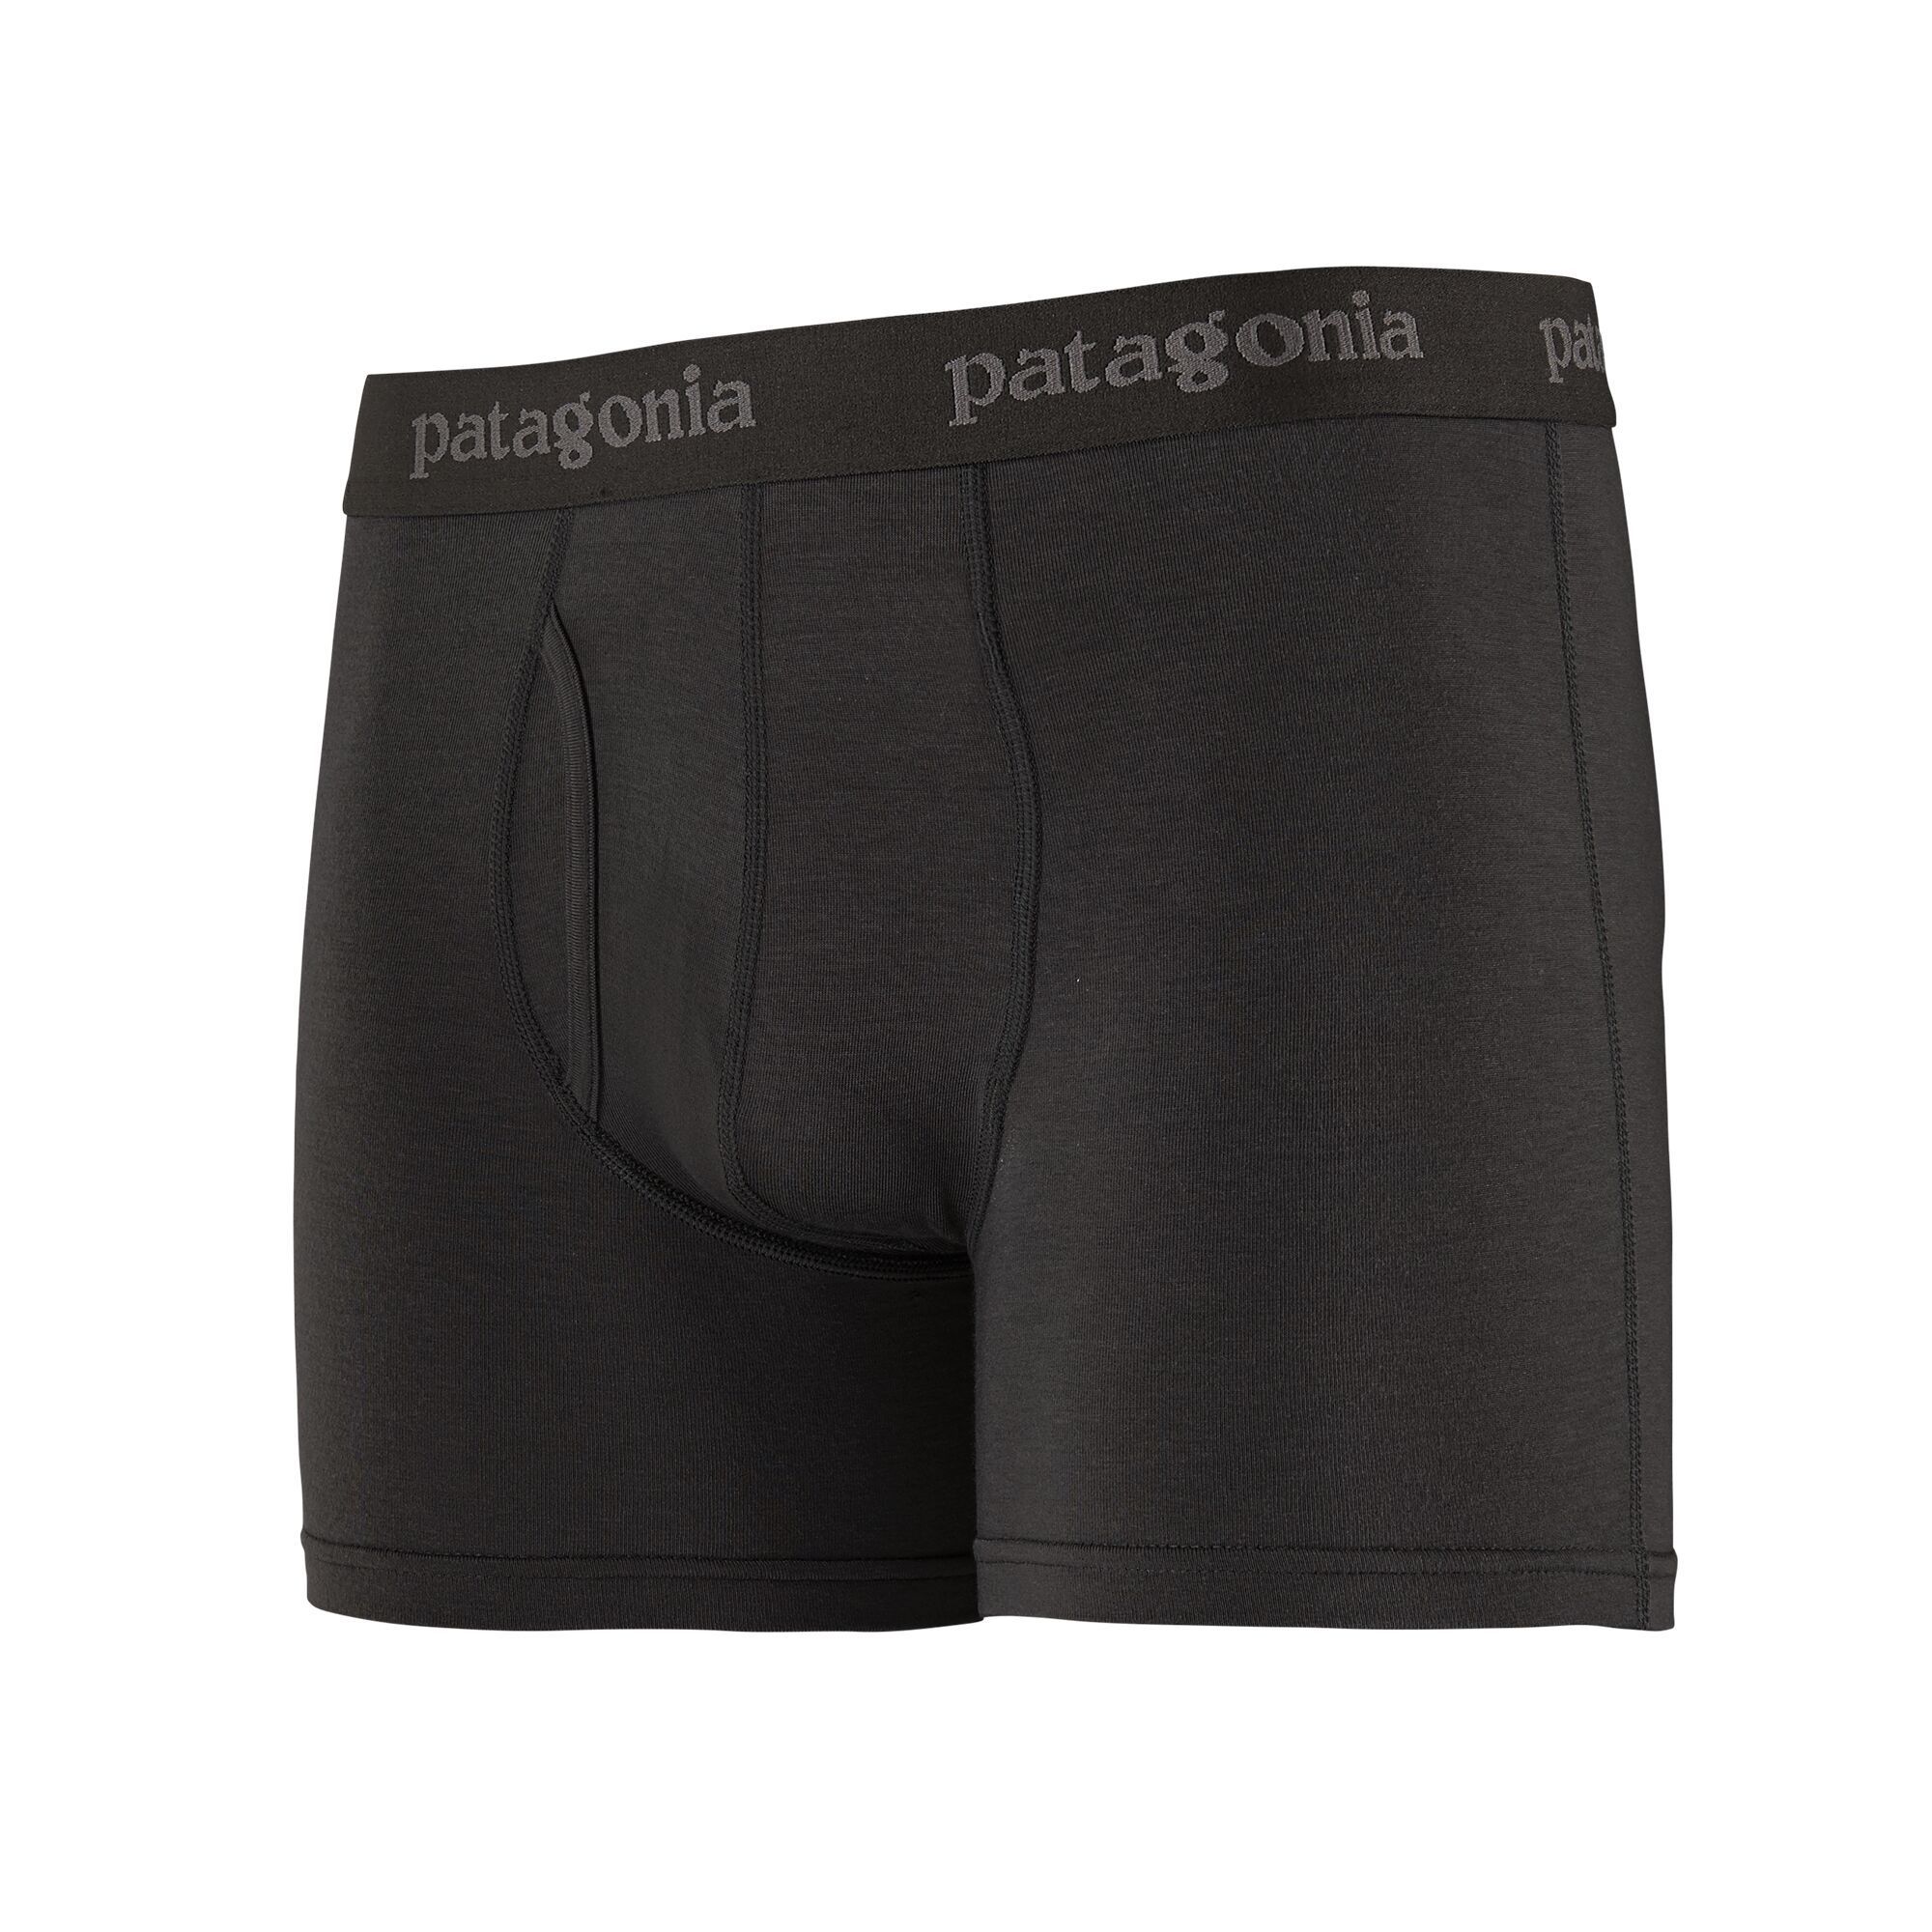 Patagonia Essential Boxer Briefs - From Wood-based TENCEL, Black / S / 3"